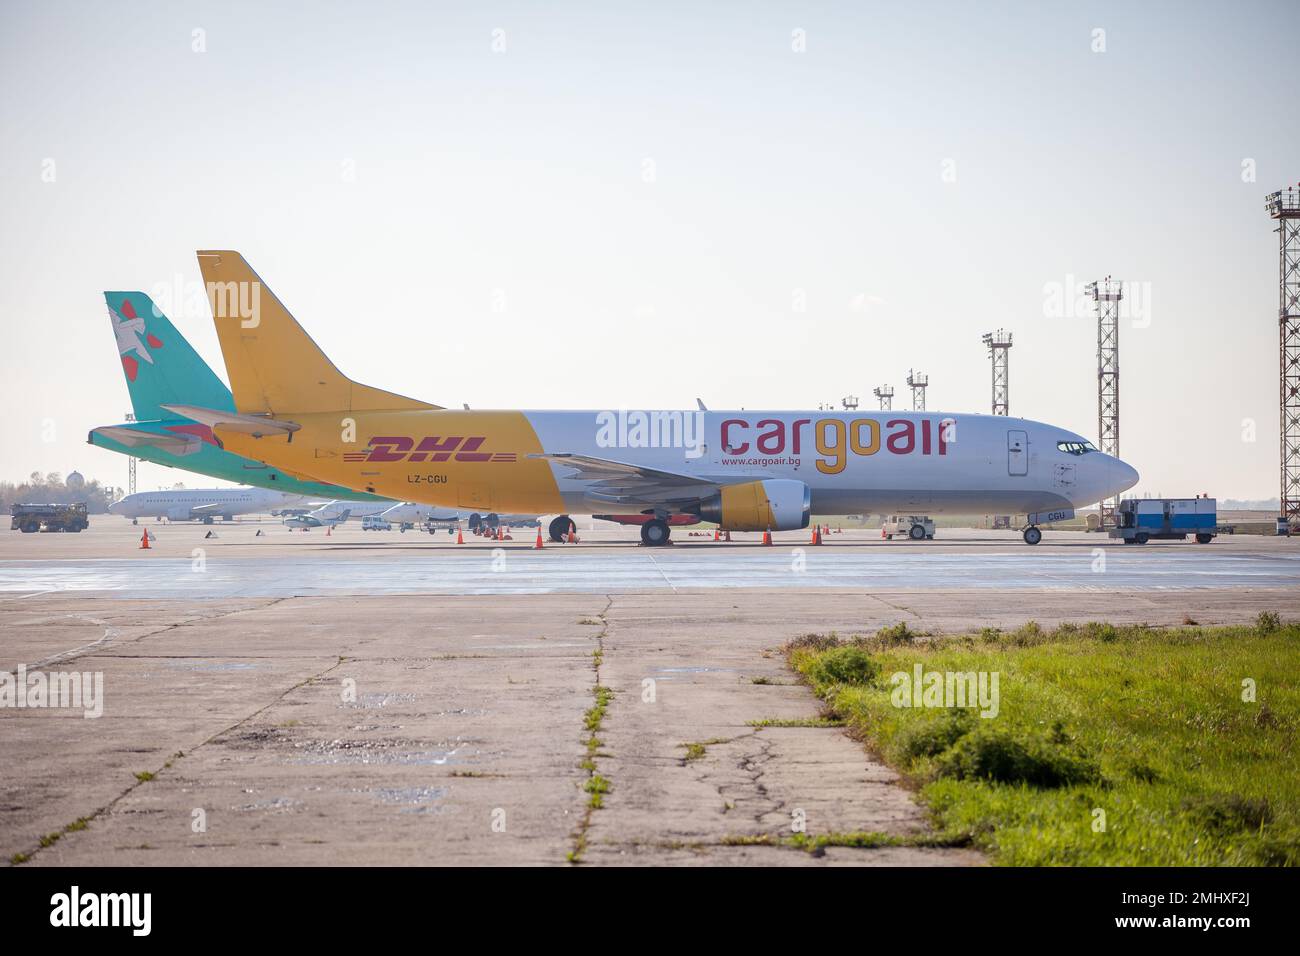 Kyiv, Ukraine - October 29, 2019: DHL cargo plane at the runway of international airport Boryspil. Cargoair airlines. Delivery air transport Stock Photo